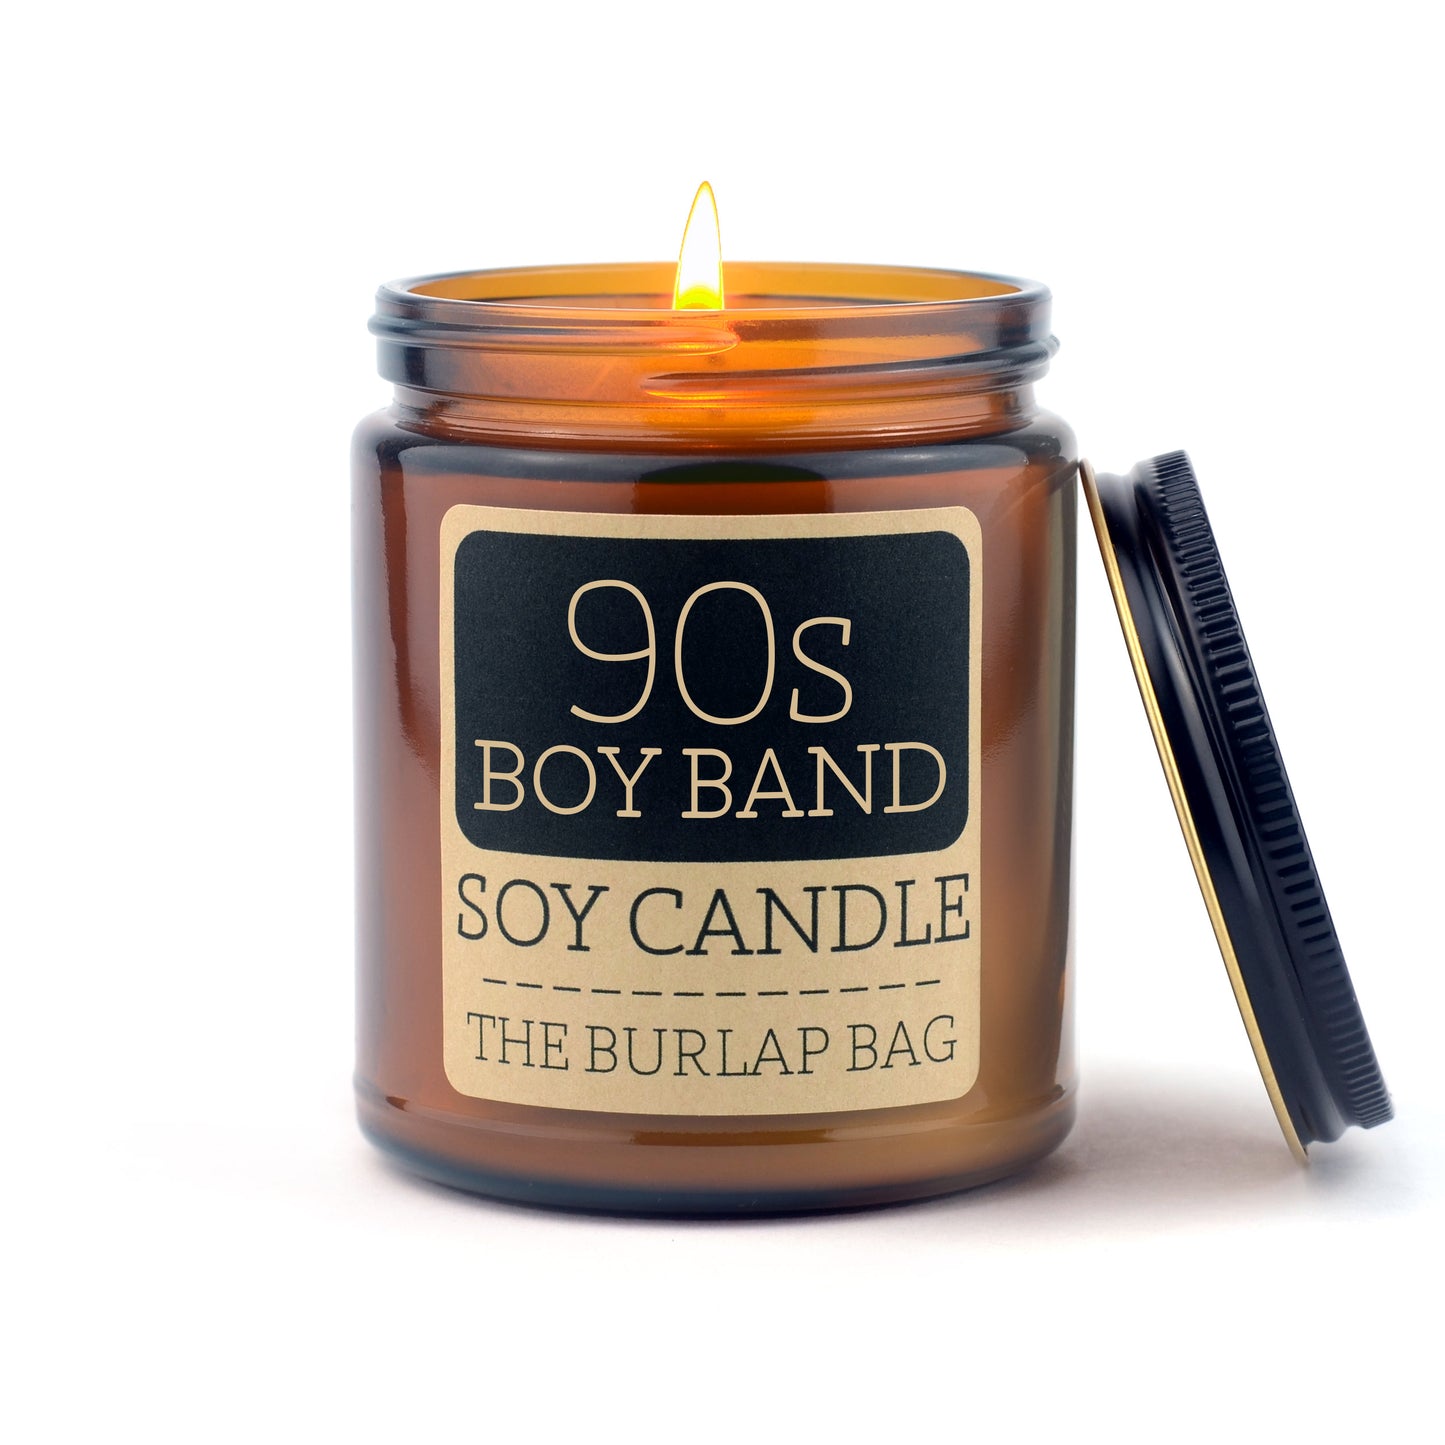 90s Boy Band - Soy Candle 9oz